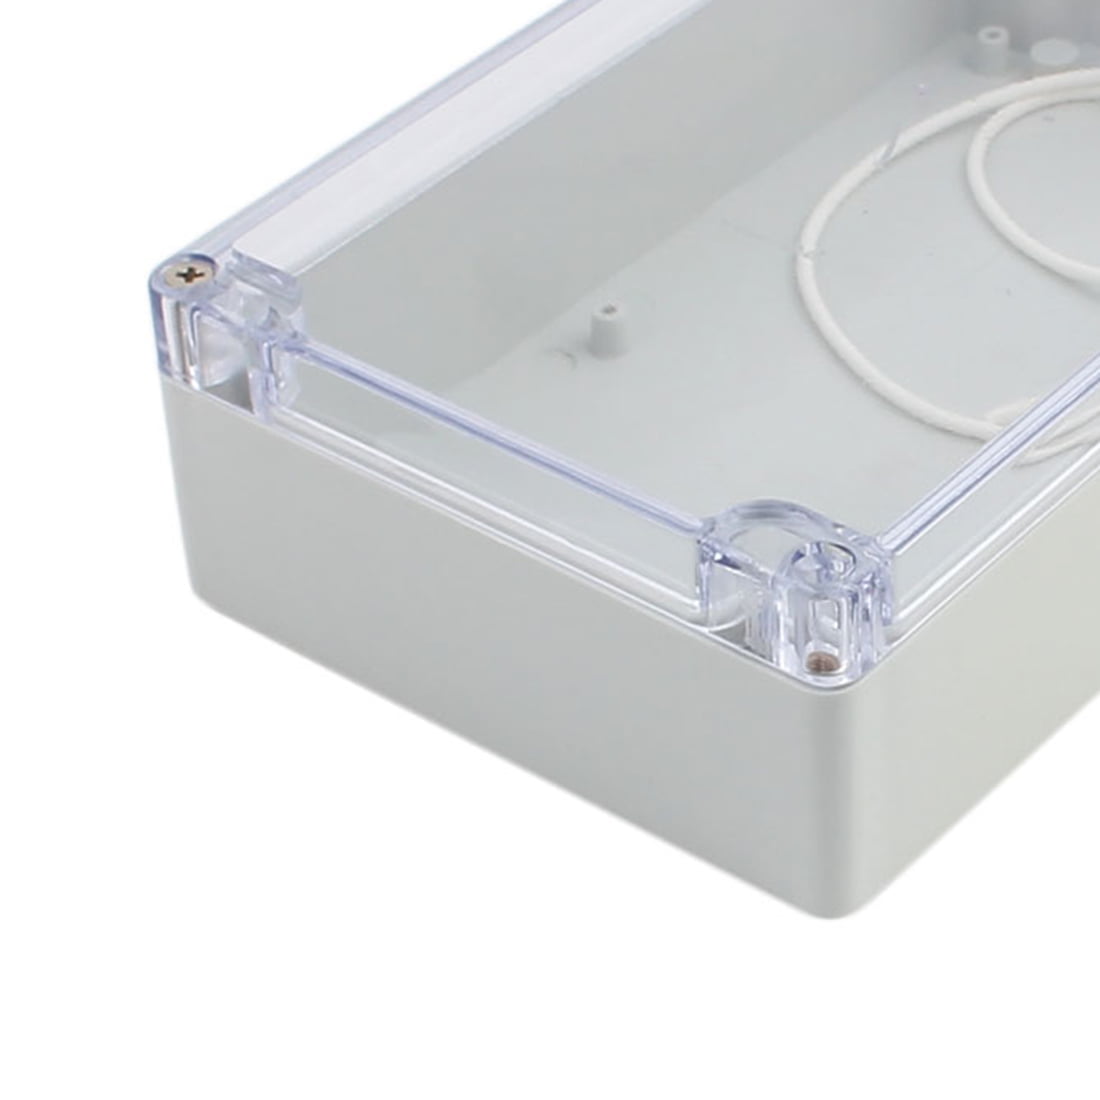 85x58x33 Waterproof Clear Cover Electronic Cable Project Box Enclosure Case HI 